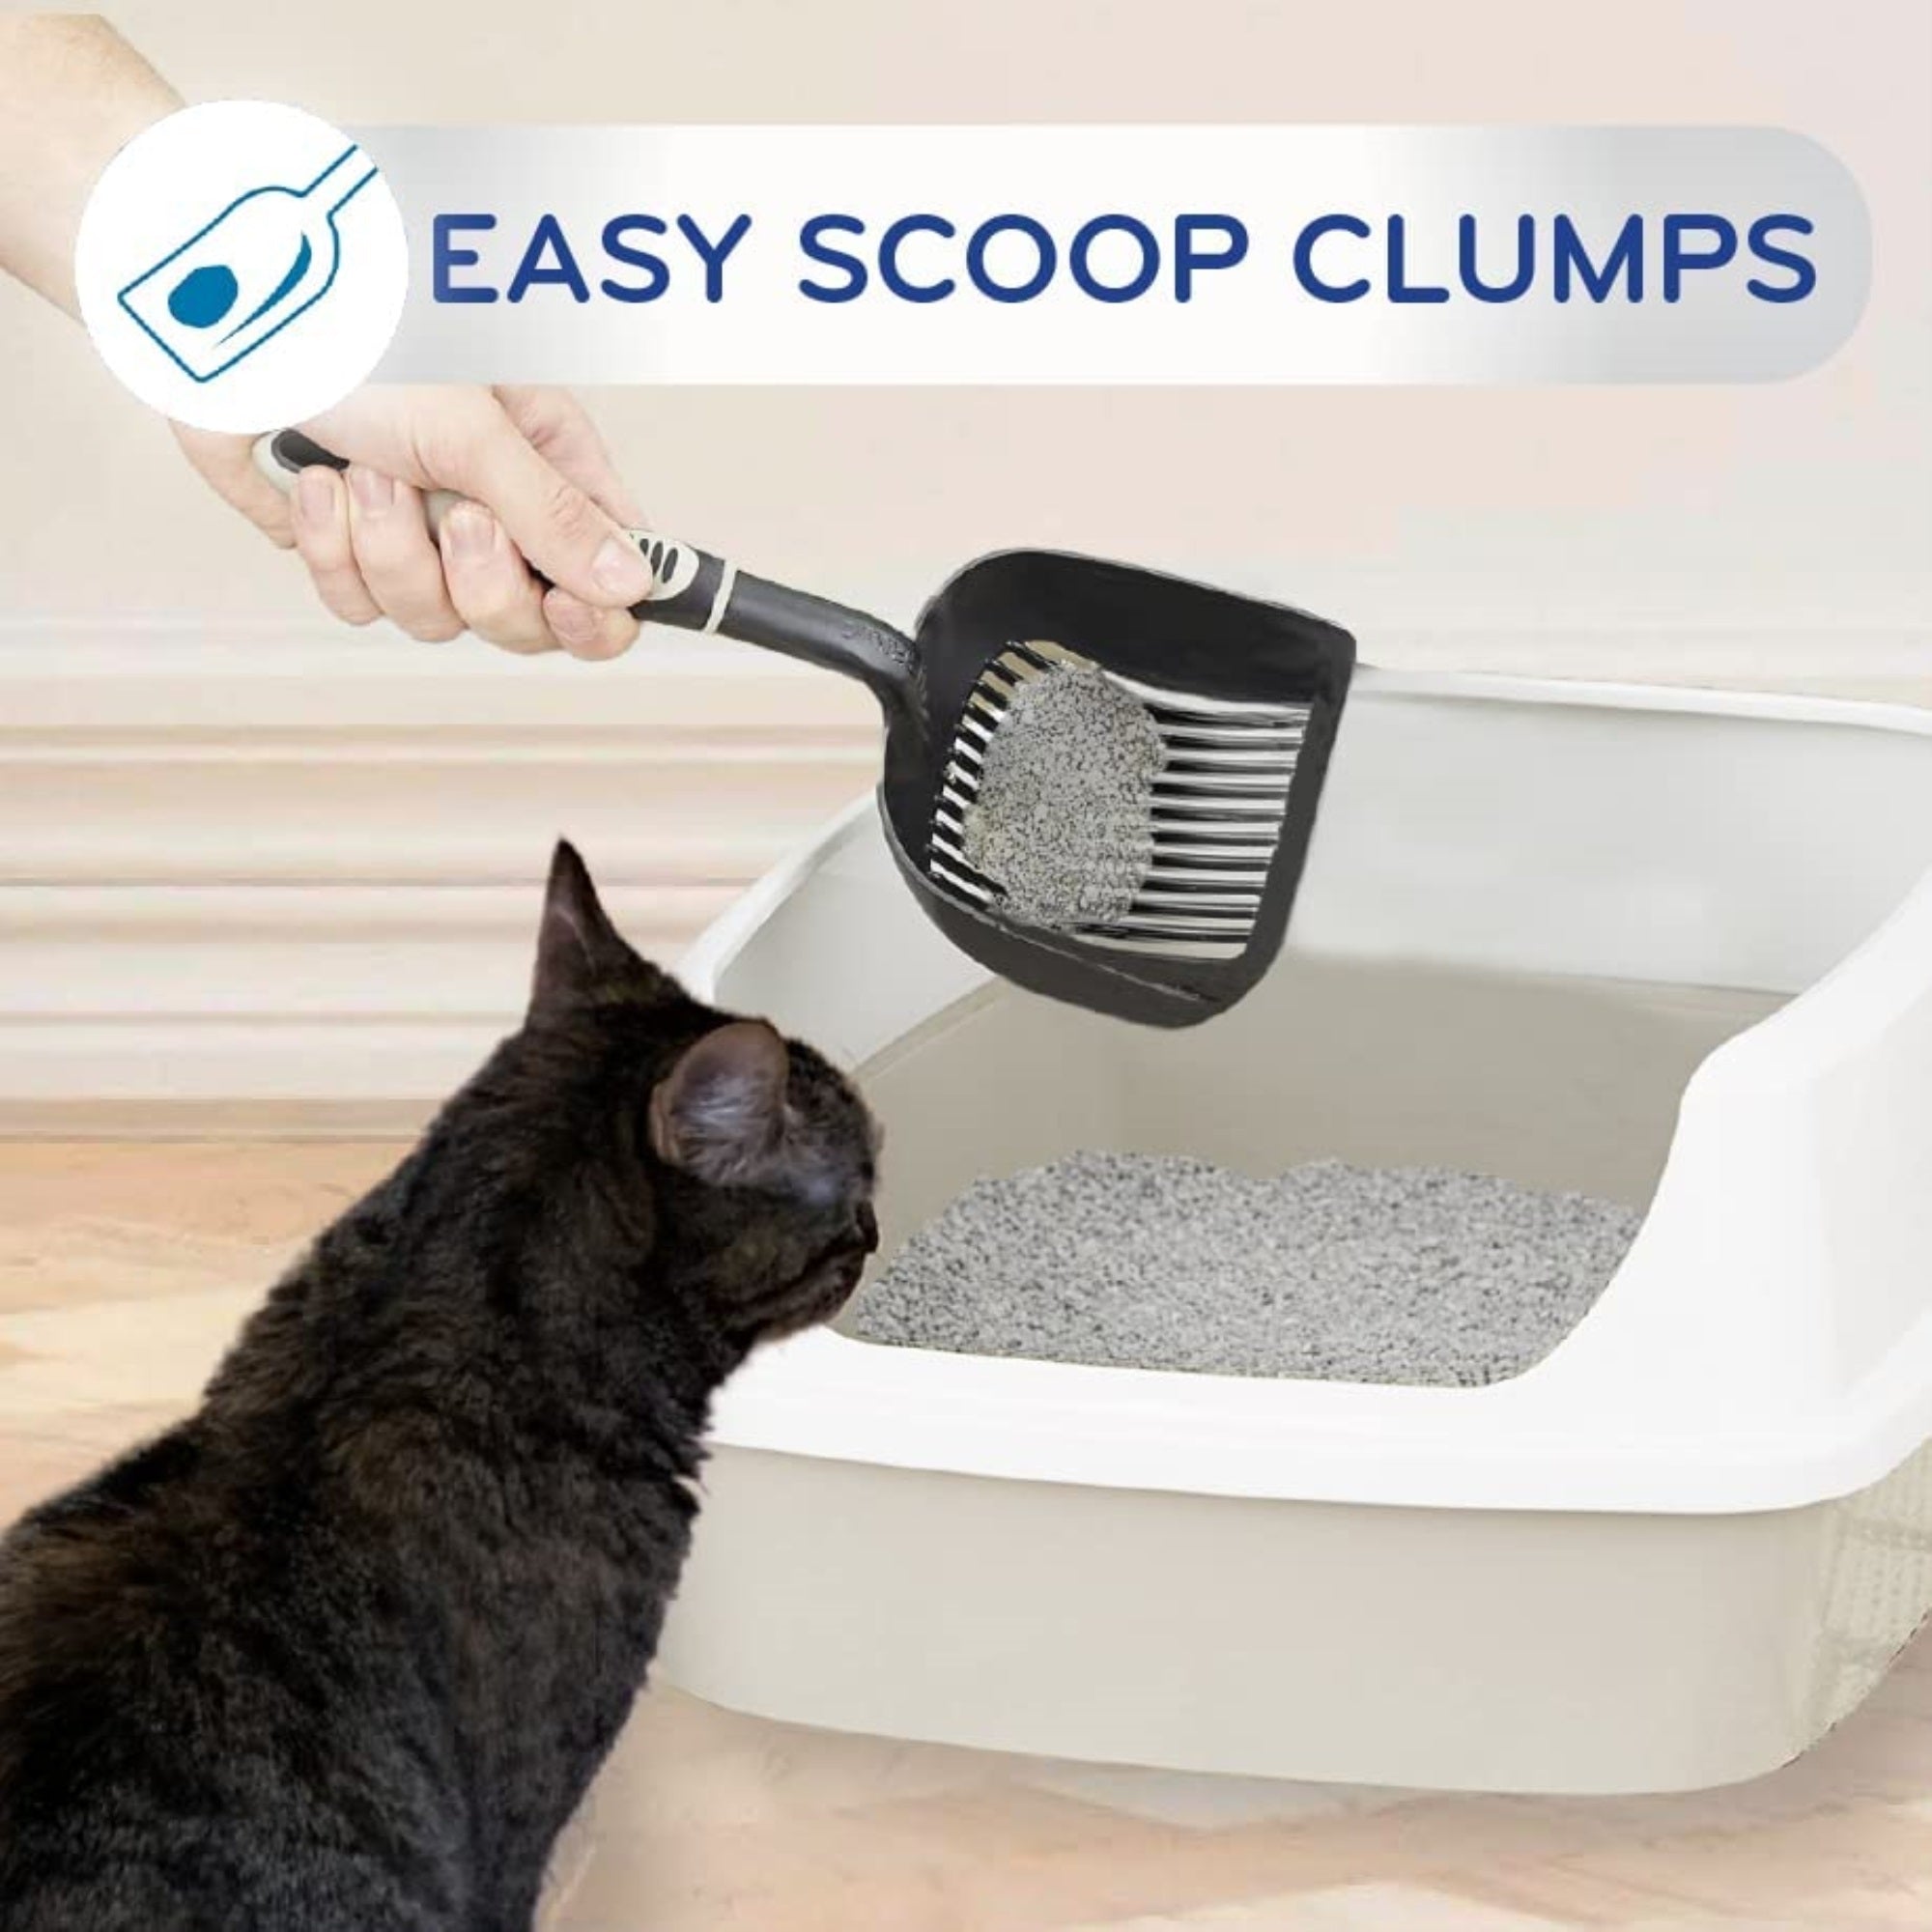 Cat's Pride Lightweight Clumping Easy Scoop Cat Litter, 10 Pounds